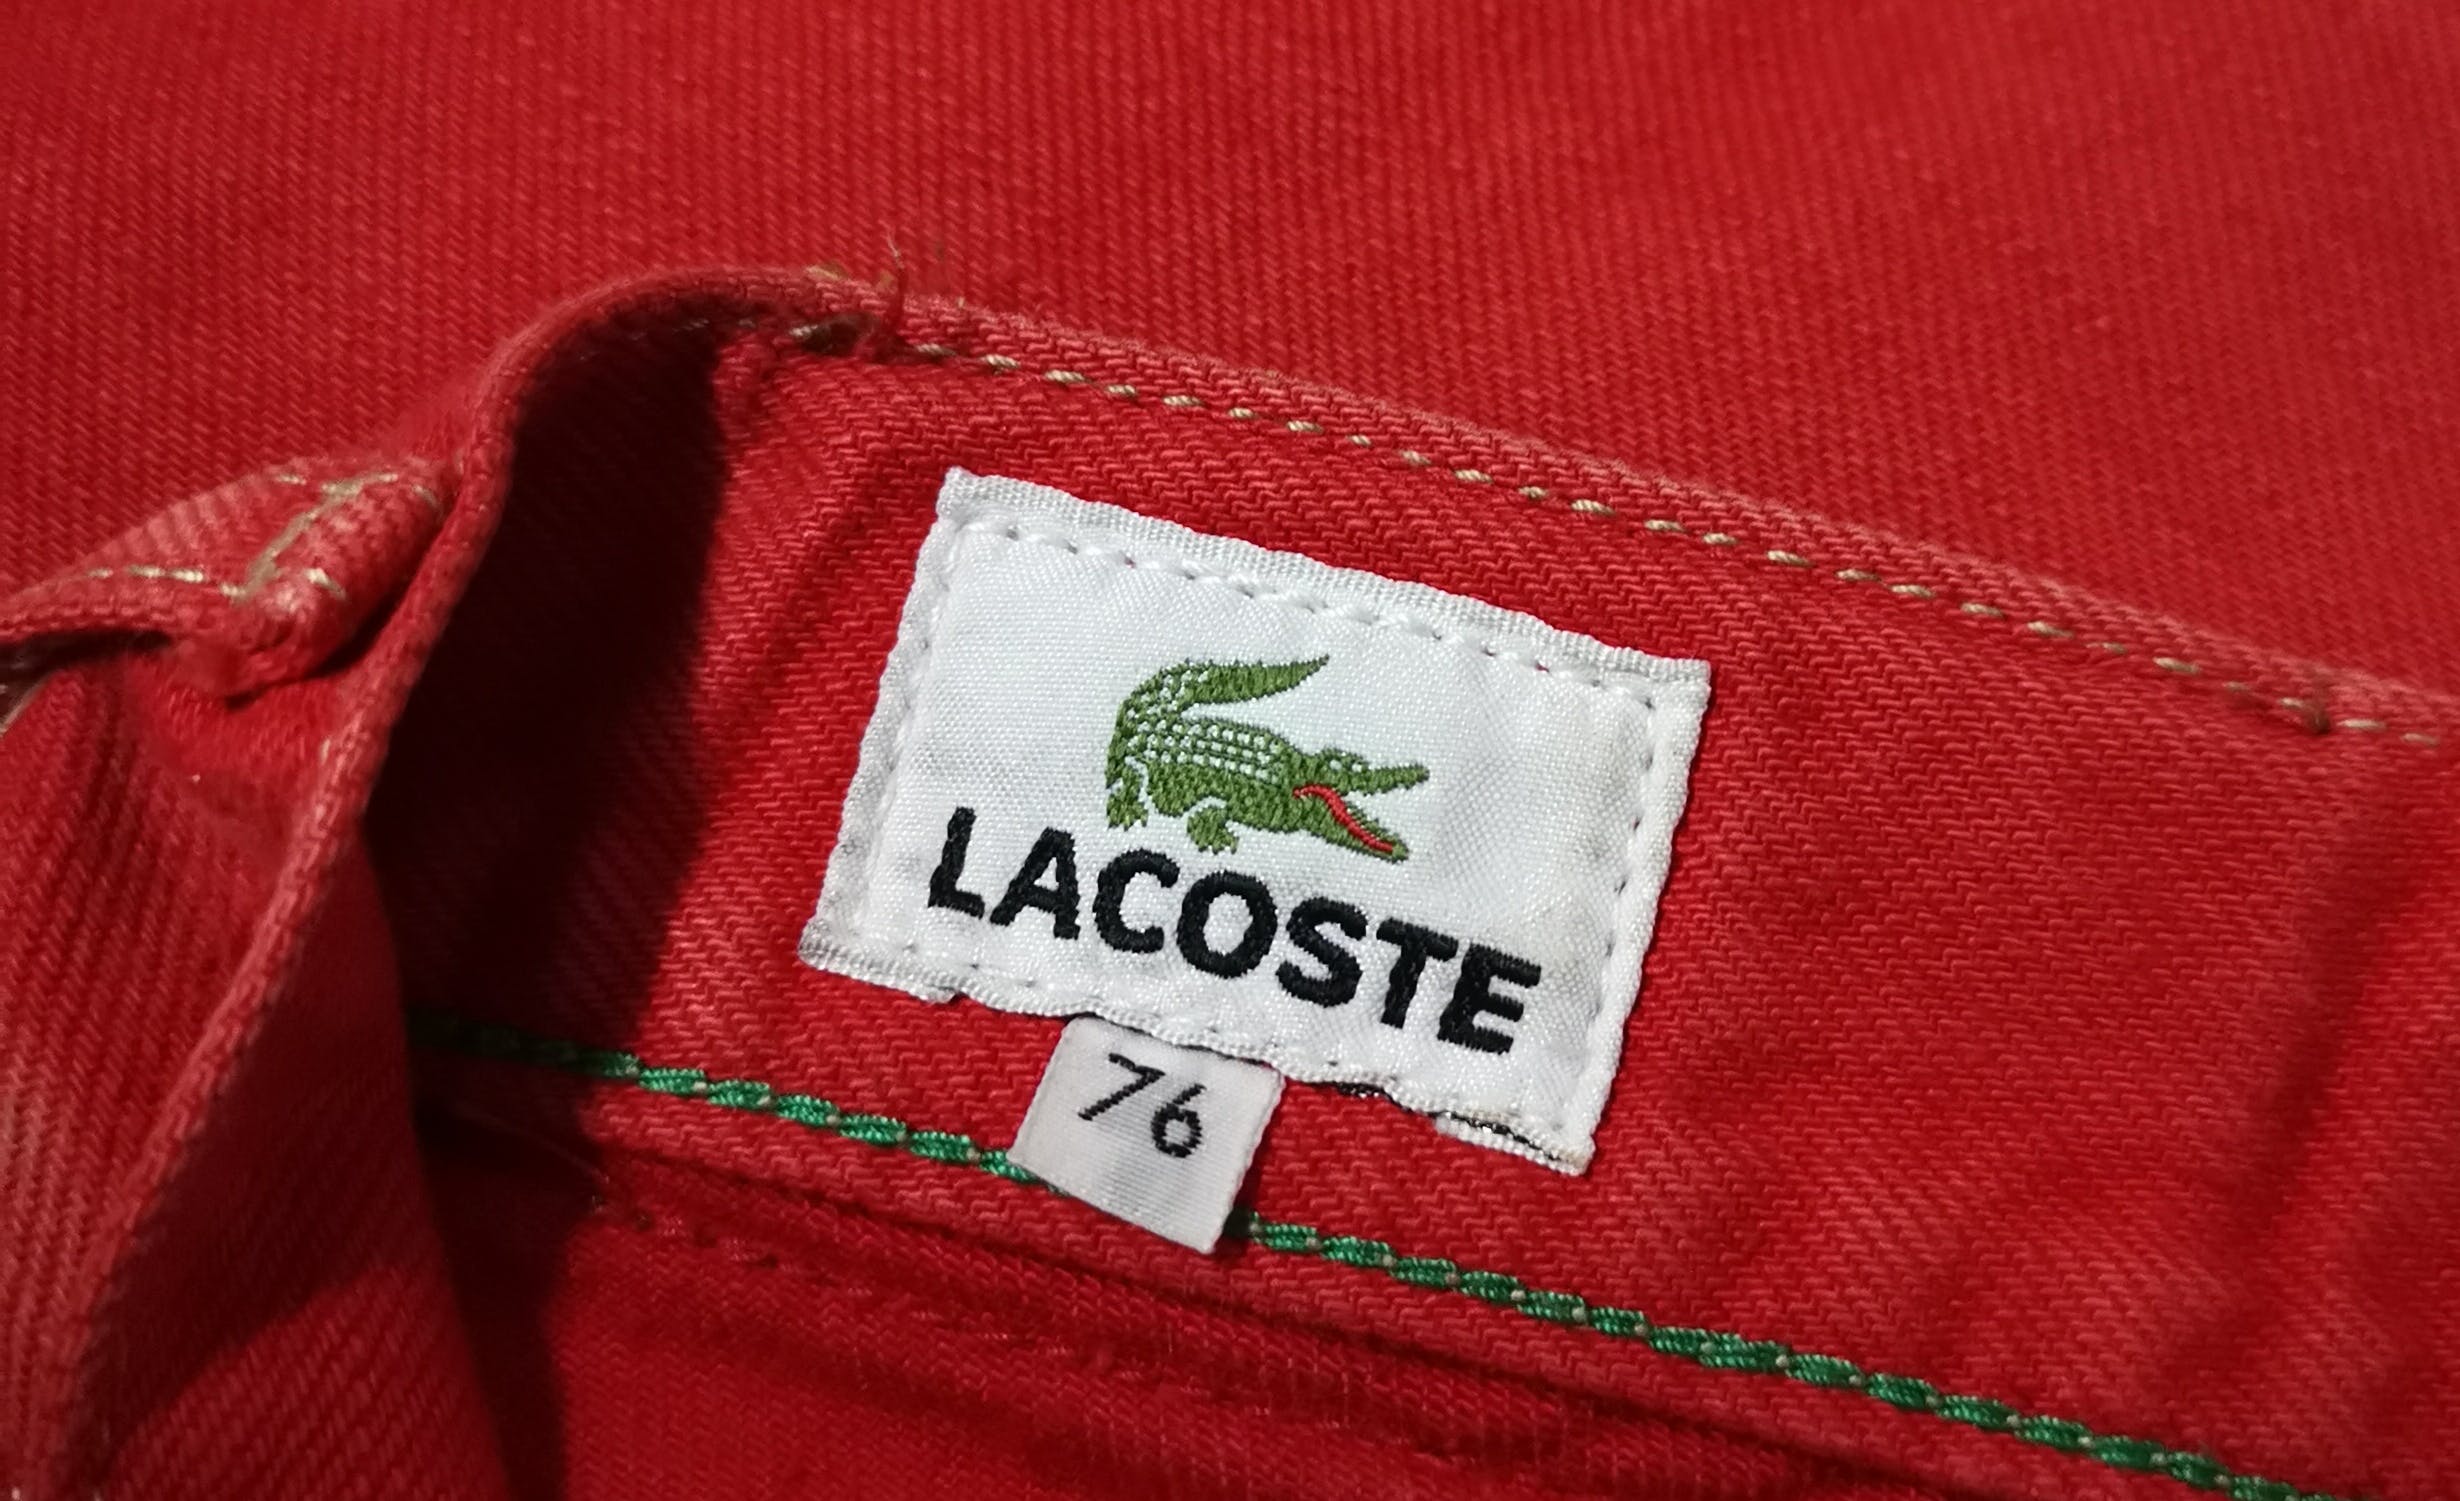 Lacoste Dirty Red Denim - 6